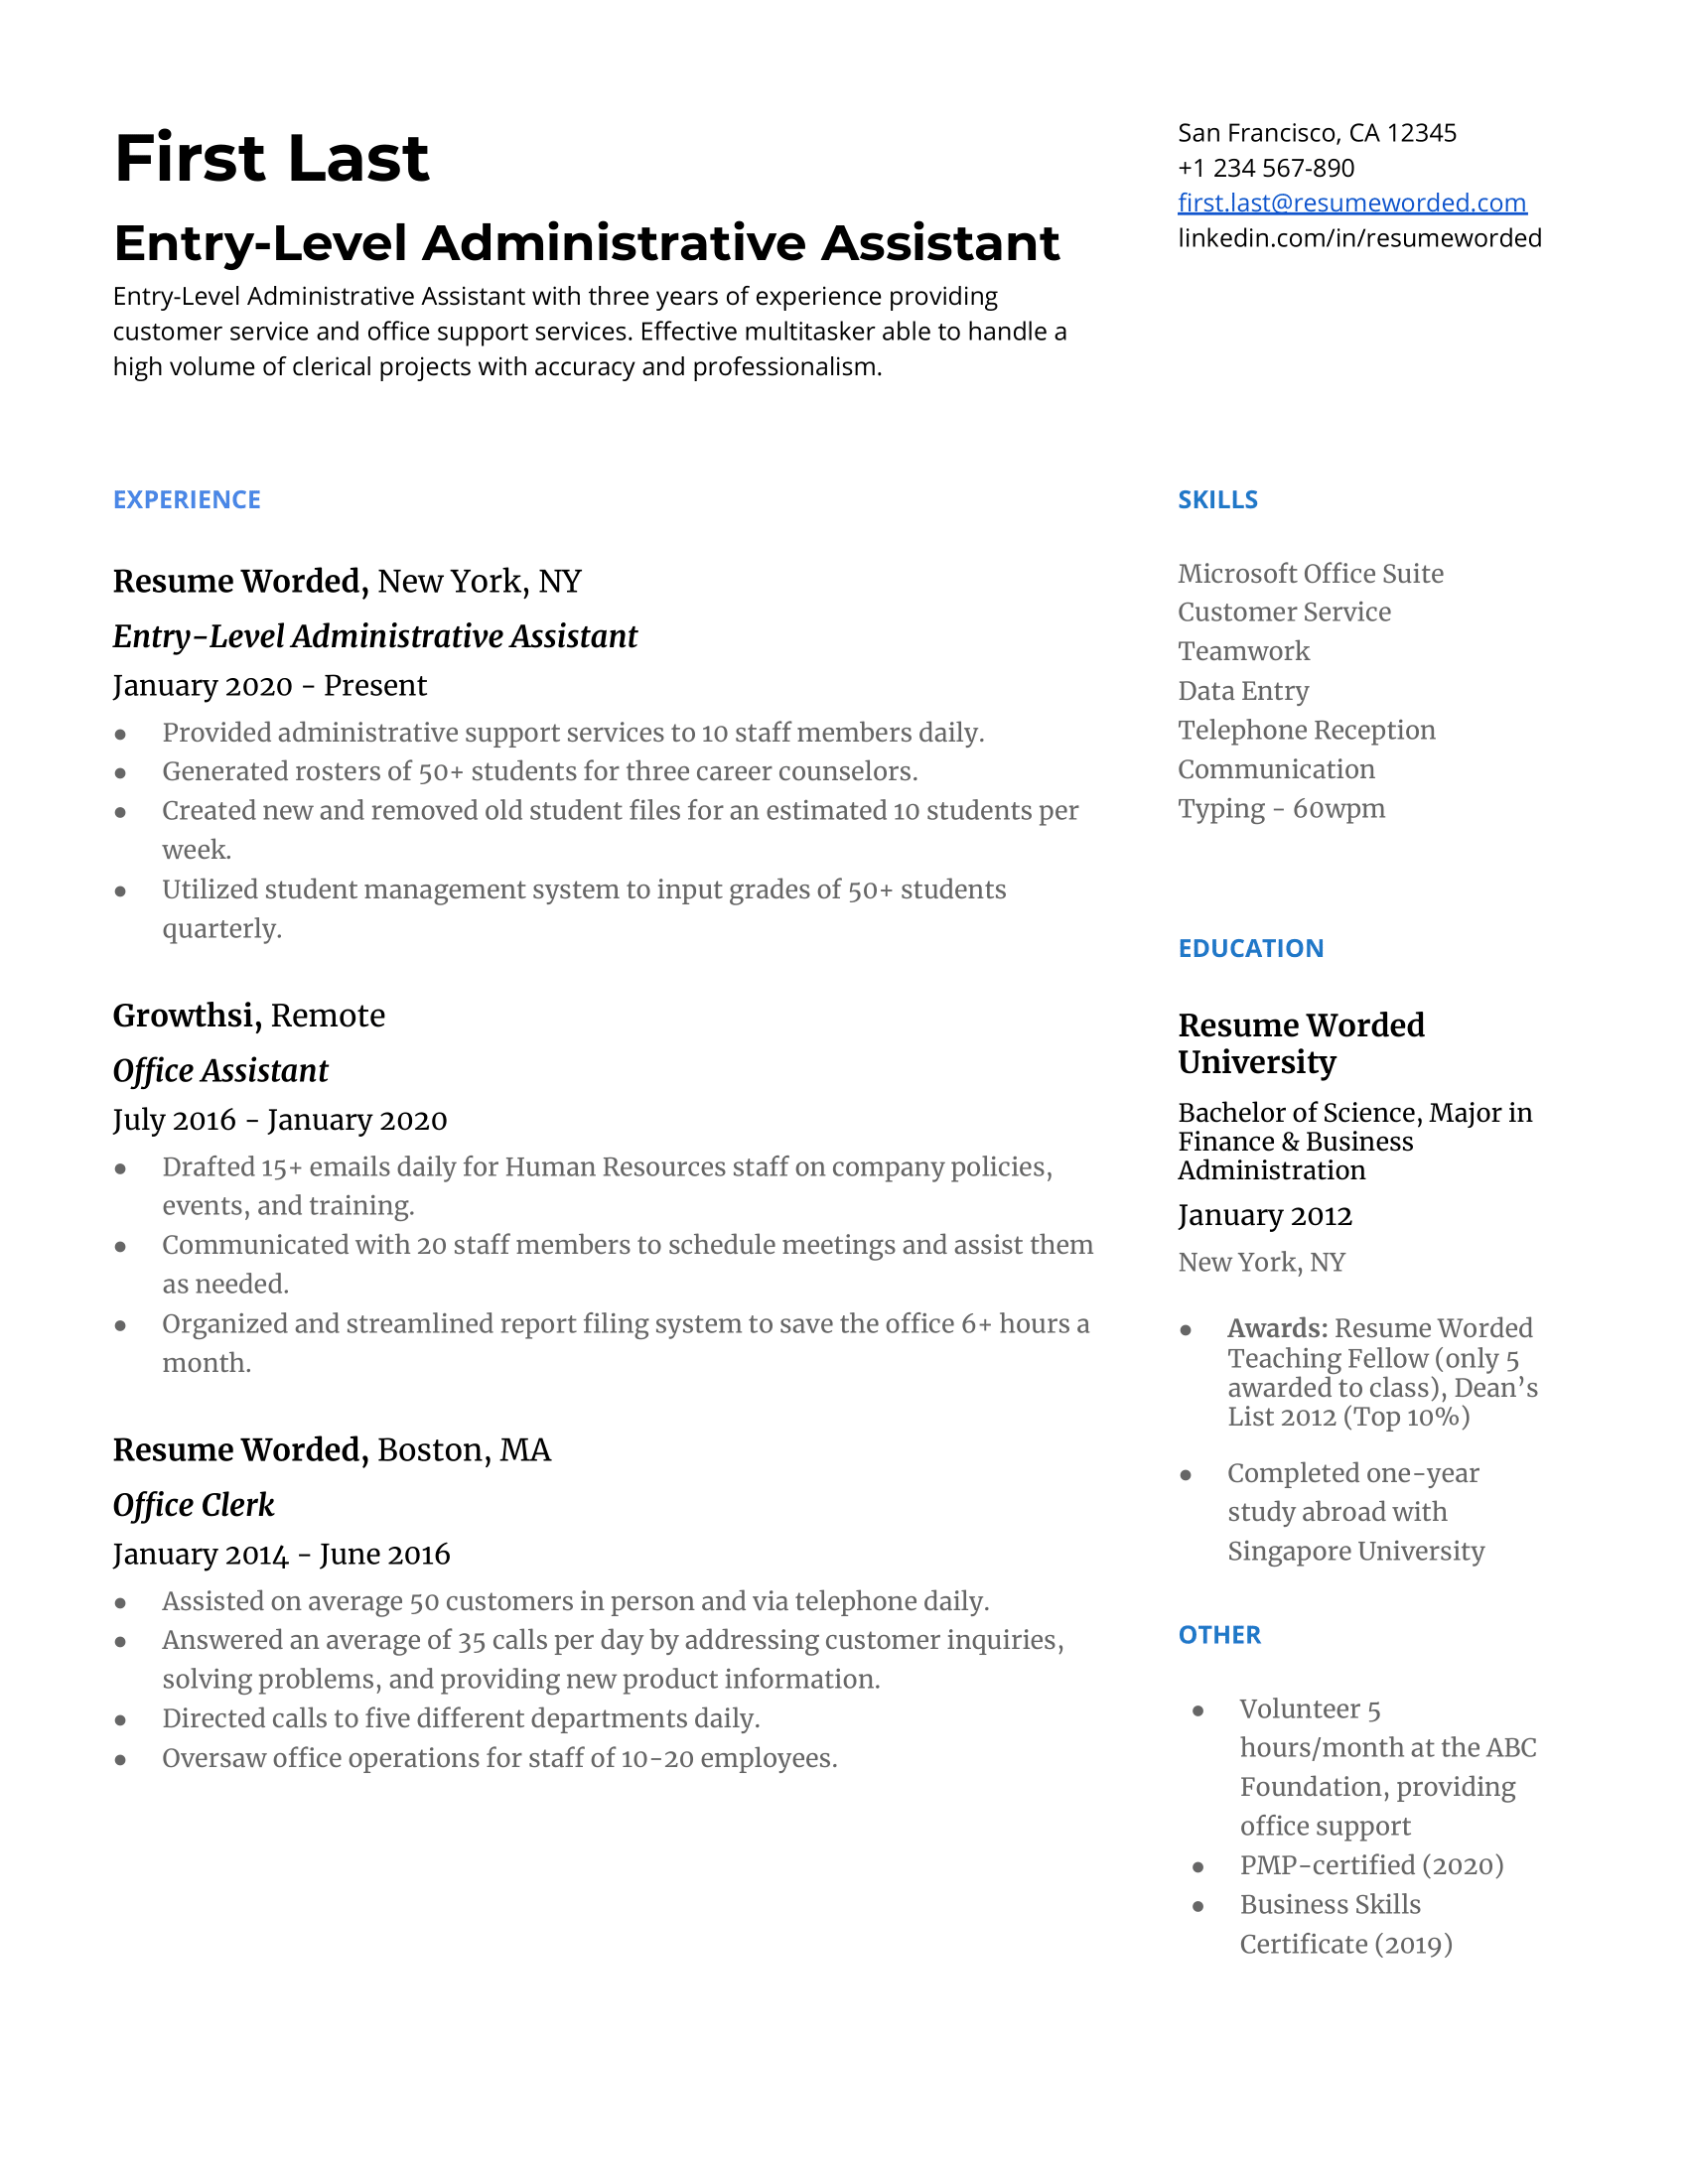 Entry Level Administrative Assistant Resume Template + Example